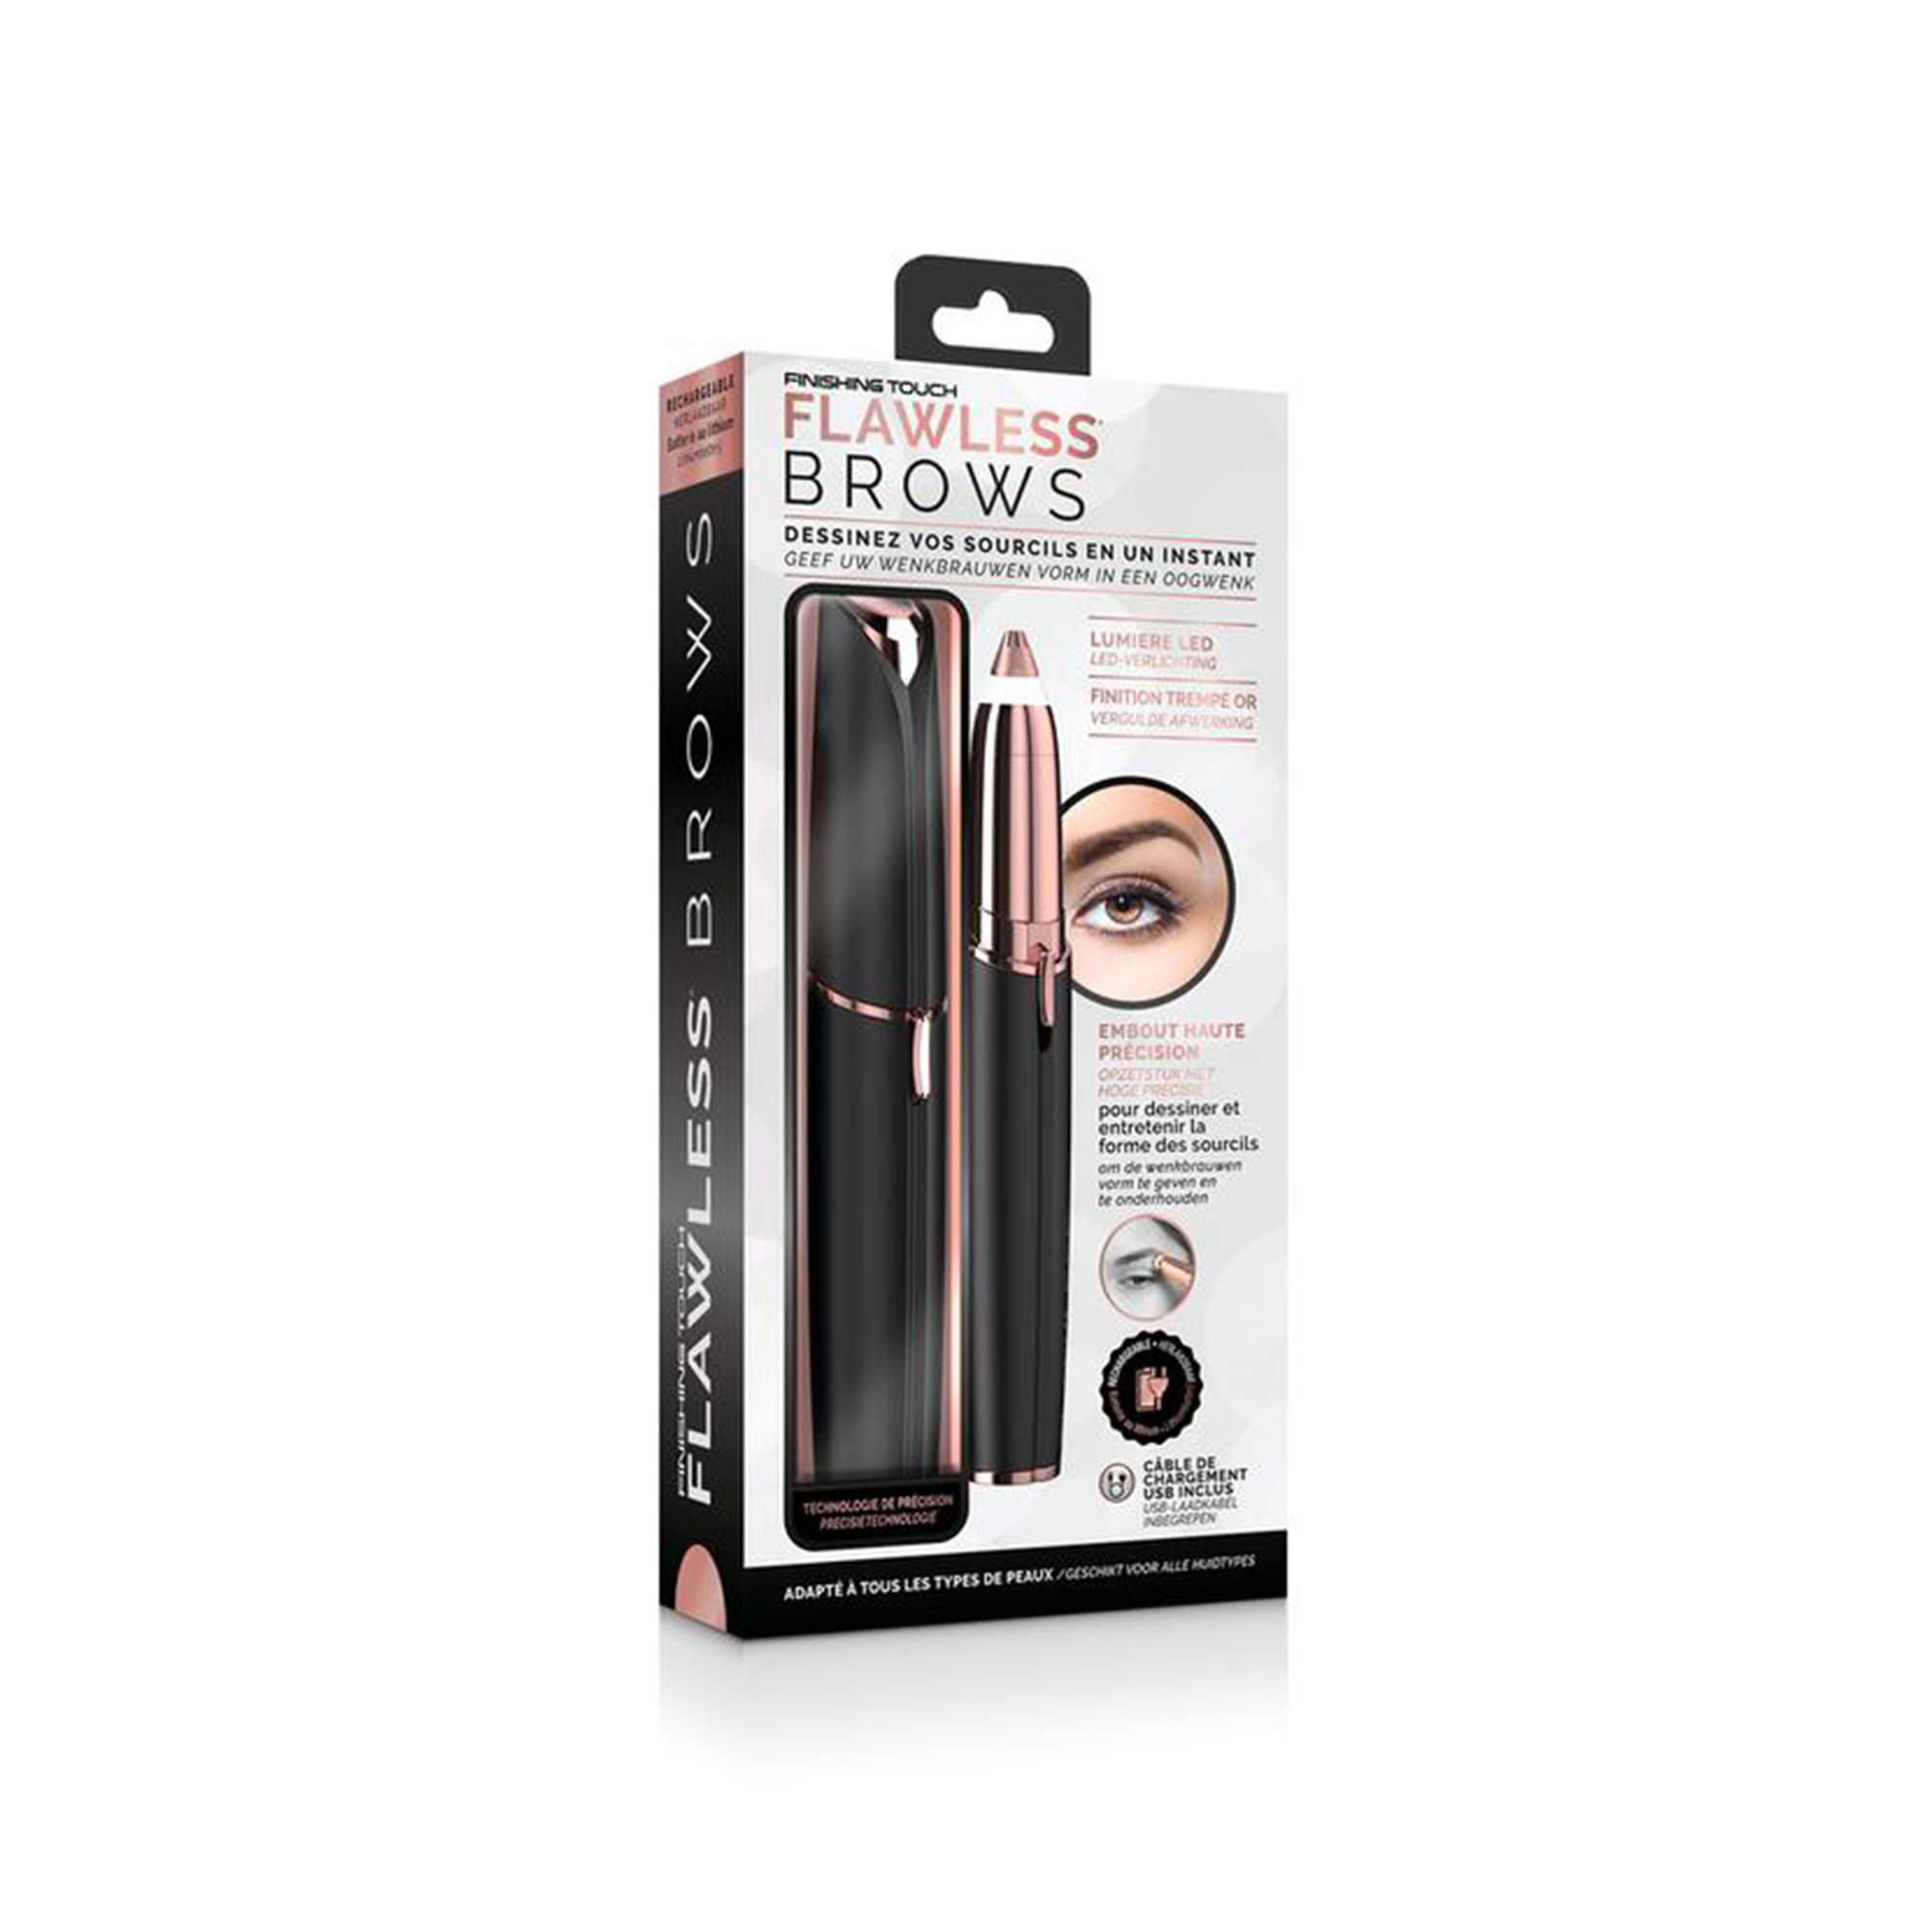 Finishing Touch Flawless Brows USB pack